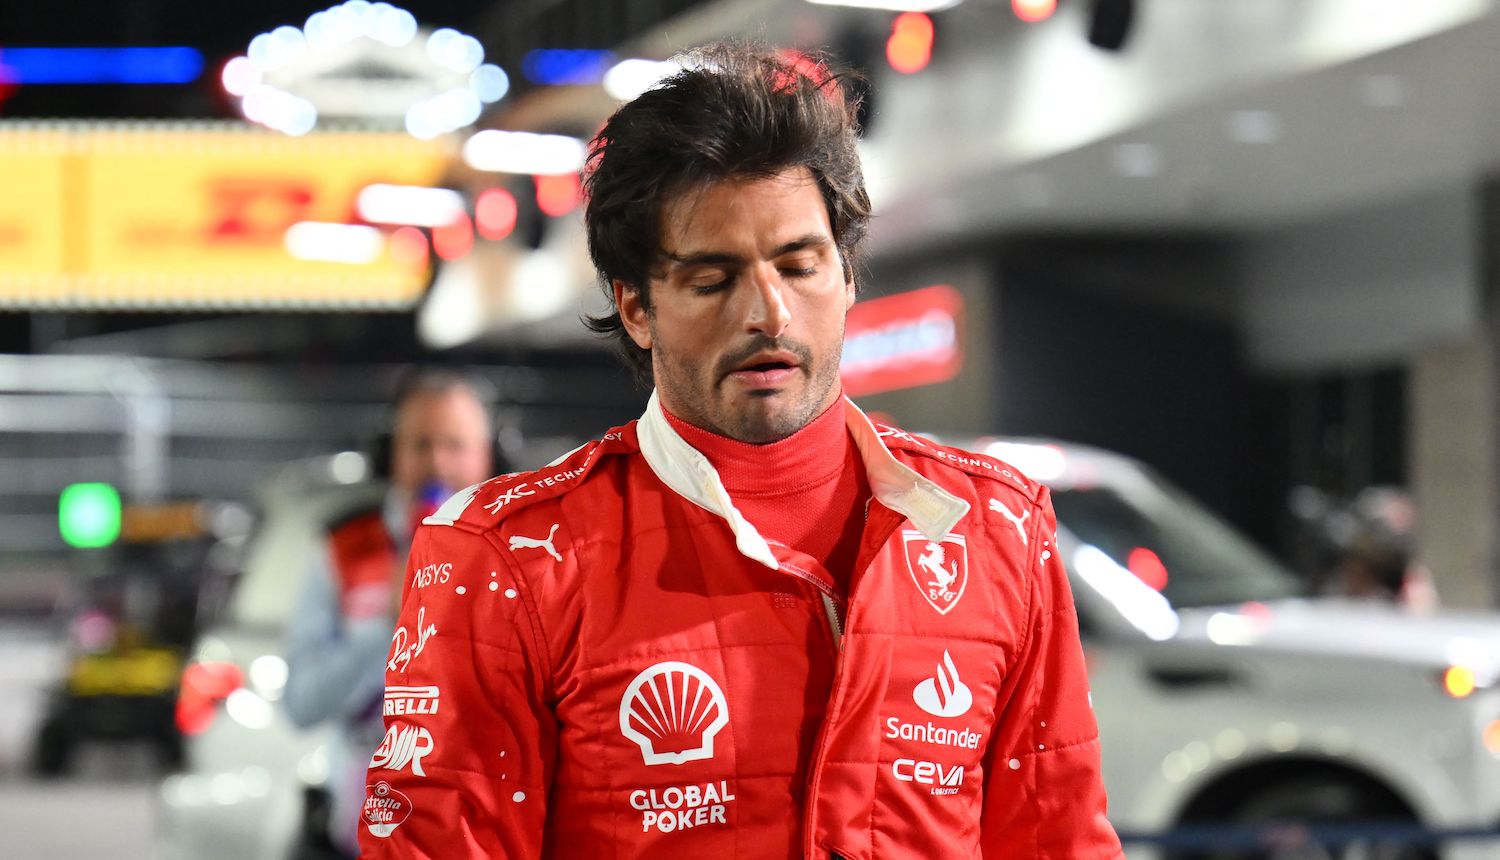 Ferrari's Spanish driver Carlos Sainz Jr., returns to the pit after an accident during the first practice session for the Las Vegas Formula One Grand Prix on November 16, 2023, in Las Vegas, Nevada. Race stewards cancelled the practice after the accident to inspect the track. The session was cut short after around ten minutes due to a loose drain cover, according to FIA officials. (Photo by ANGELA WEISS / AFP) (Photo by ANGELA WEISS/AFP via Getty Images)